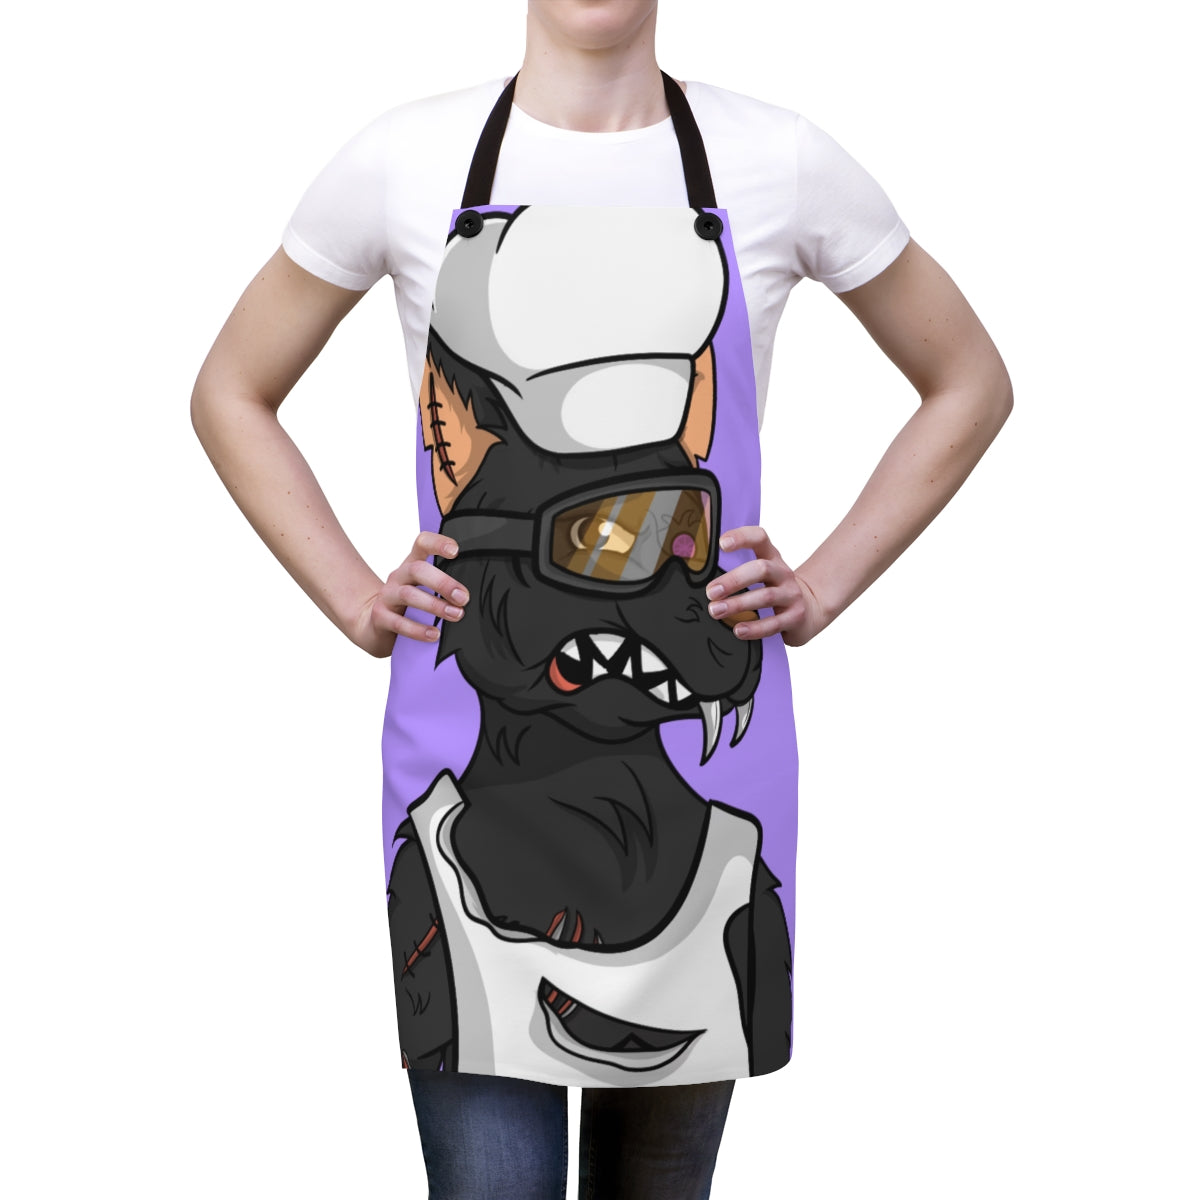 Chef Hat Cooking Wolf Muscle Shirt Ski Goggles Black Fur Cyborg Apron